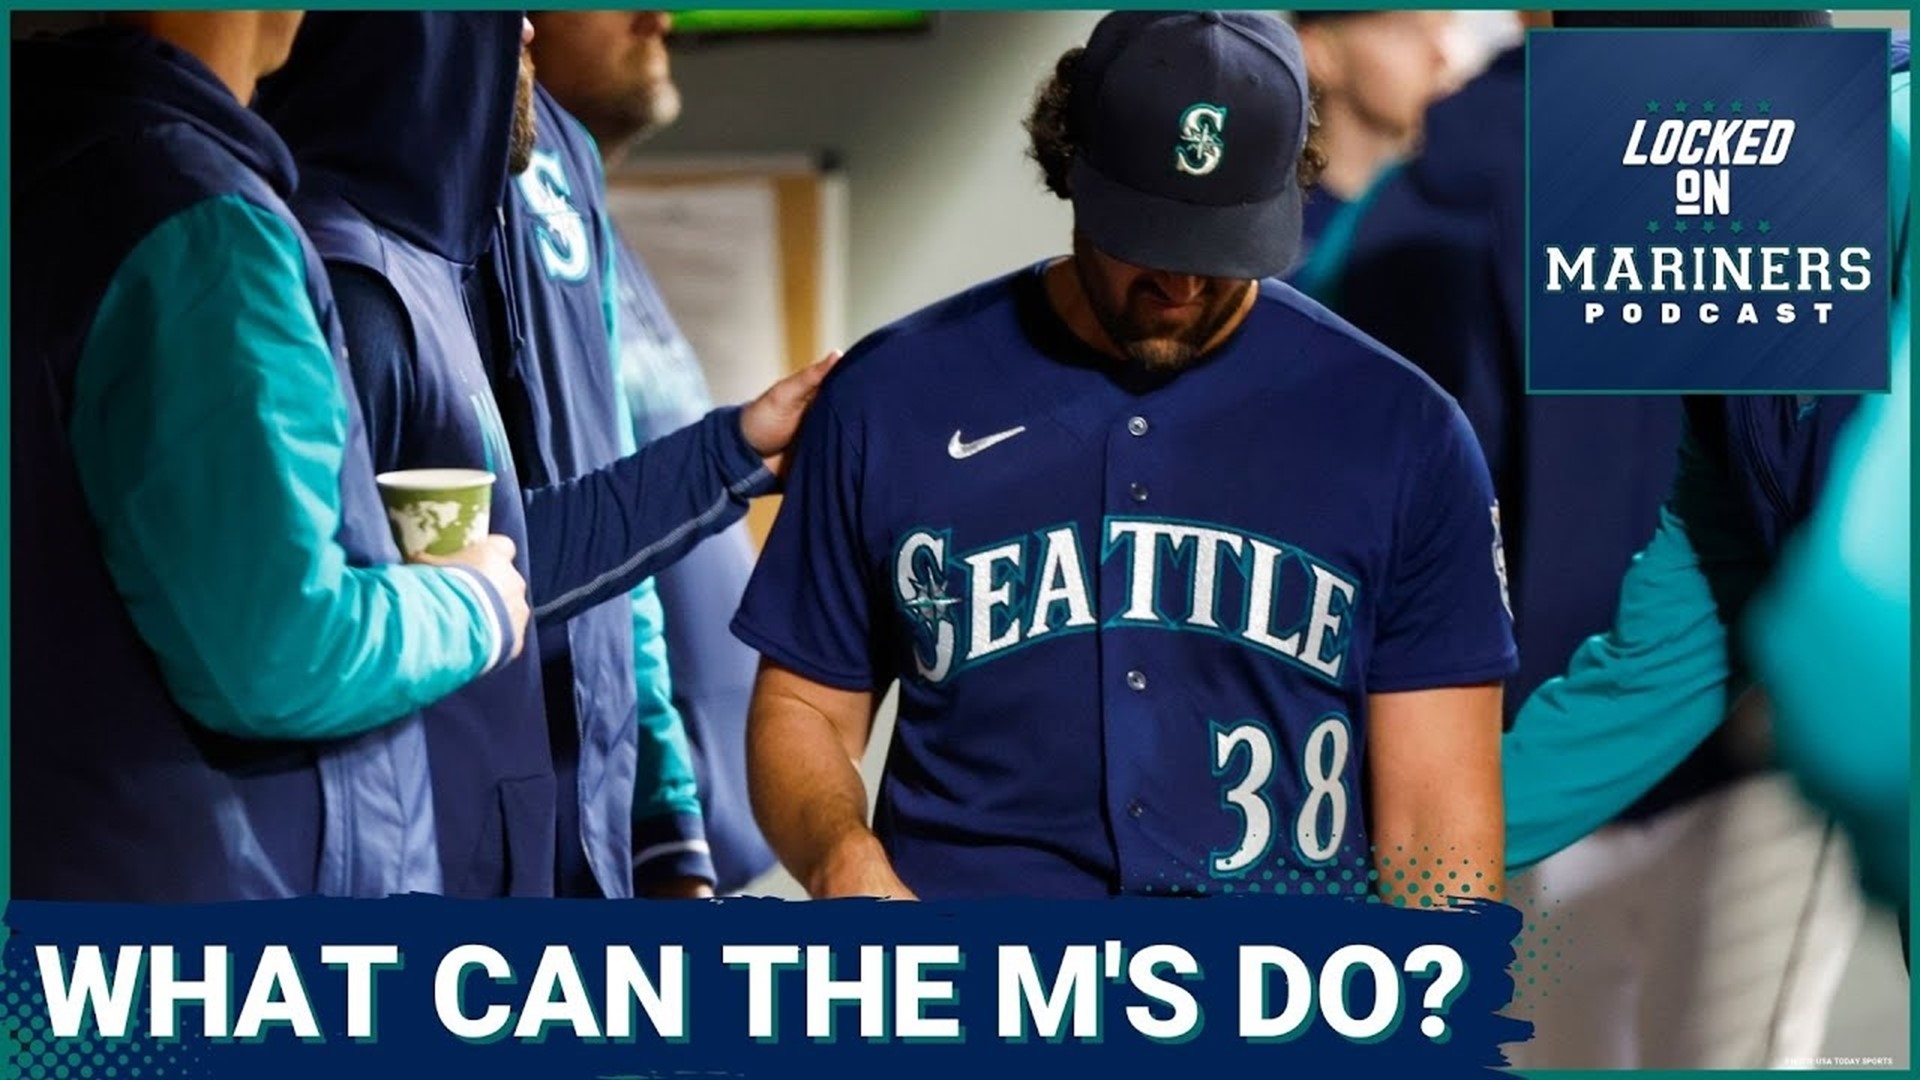 Mariners All-Star Candidates. Help send your favorite Mariners to